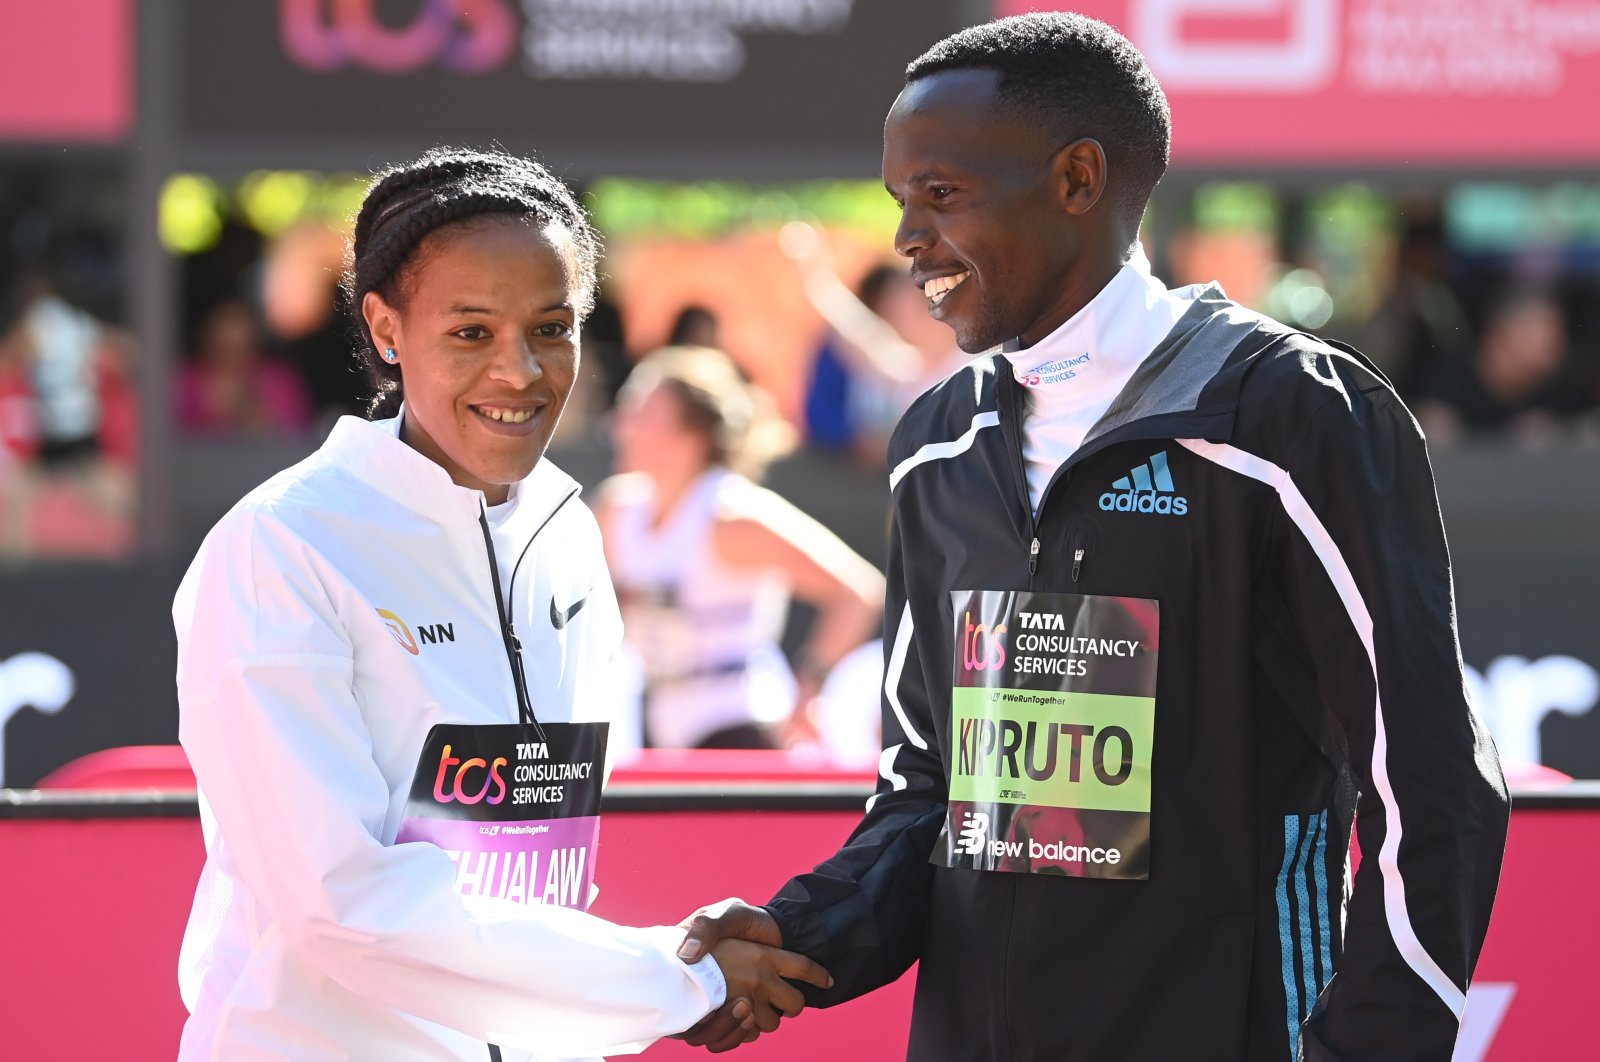 Yalemzerf Yehualaw (L) of Ethiopia and Amos Kipruto of Kenya pose for photographs after winning the women&#039;s and men&#039;s elite races respectively at the 2022 TCS London Marathon, London, Britain, Oct. 2, 2022.  (EPA Photo)